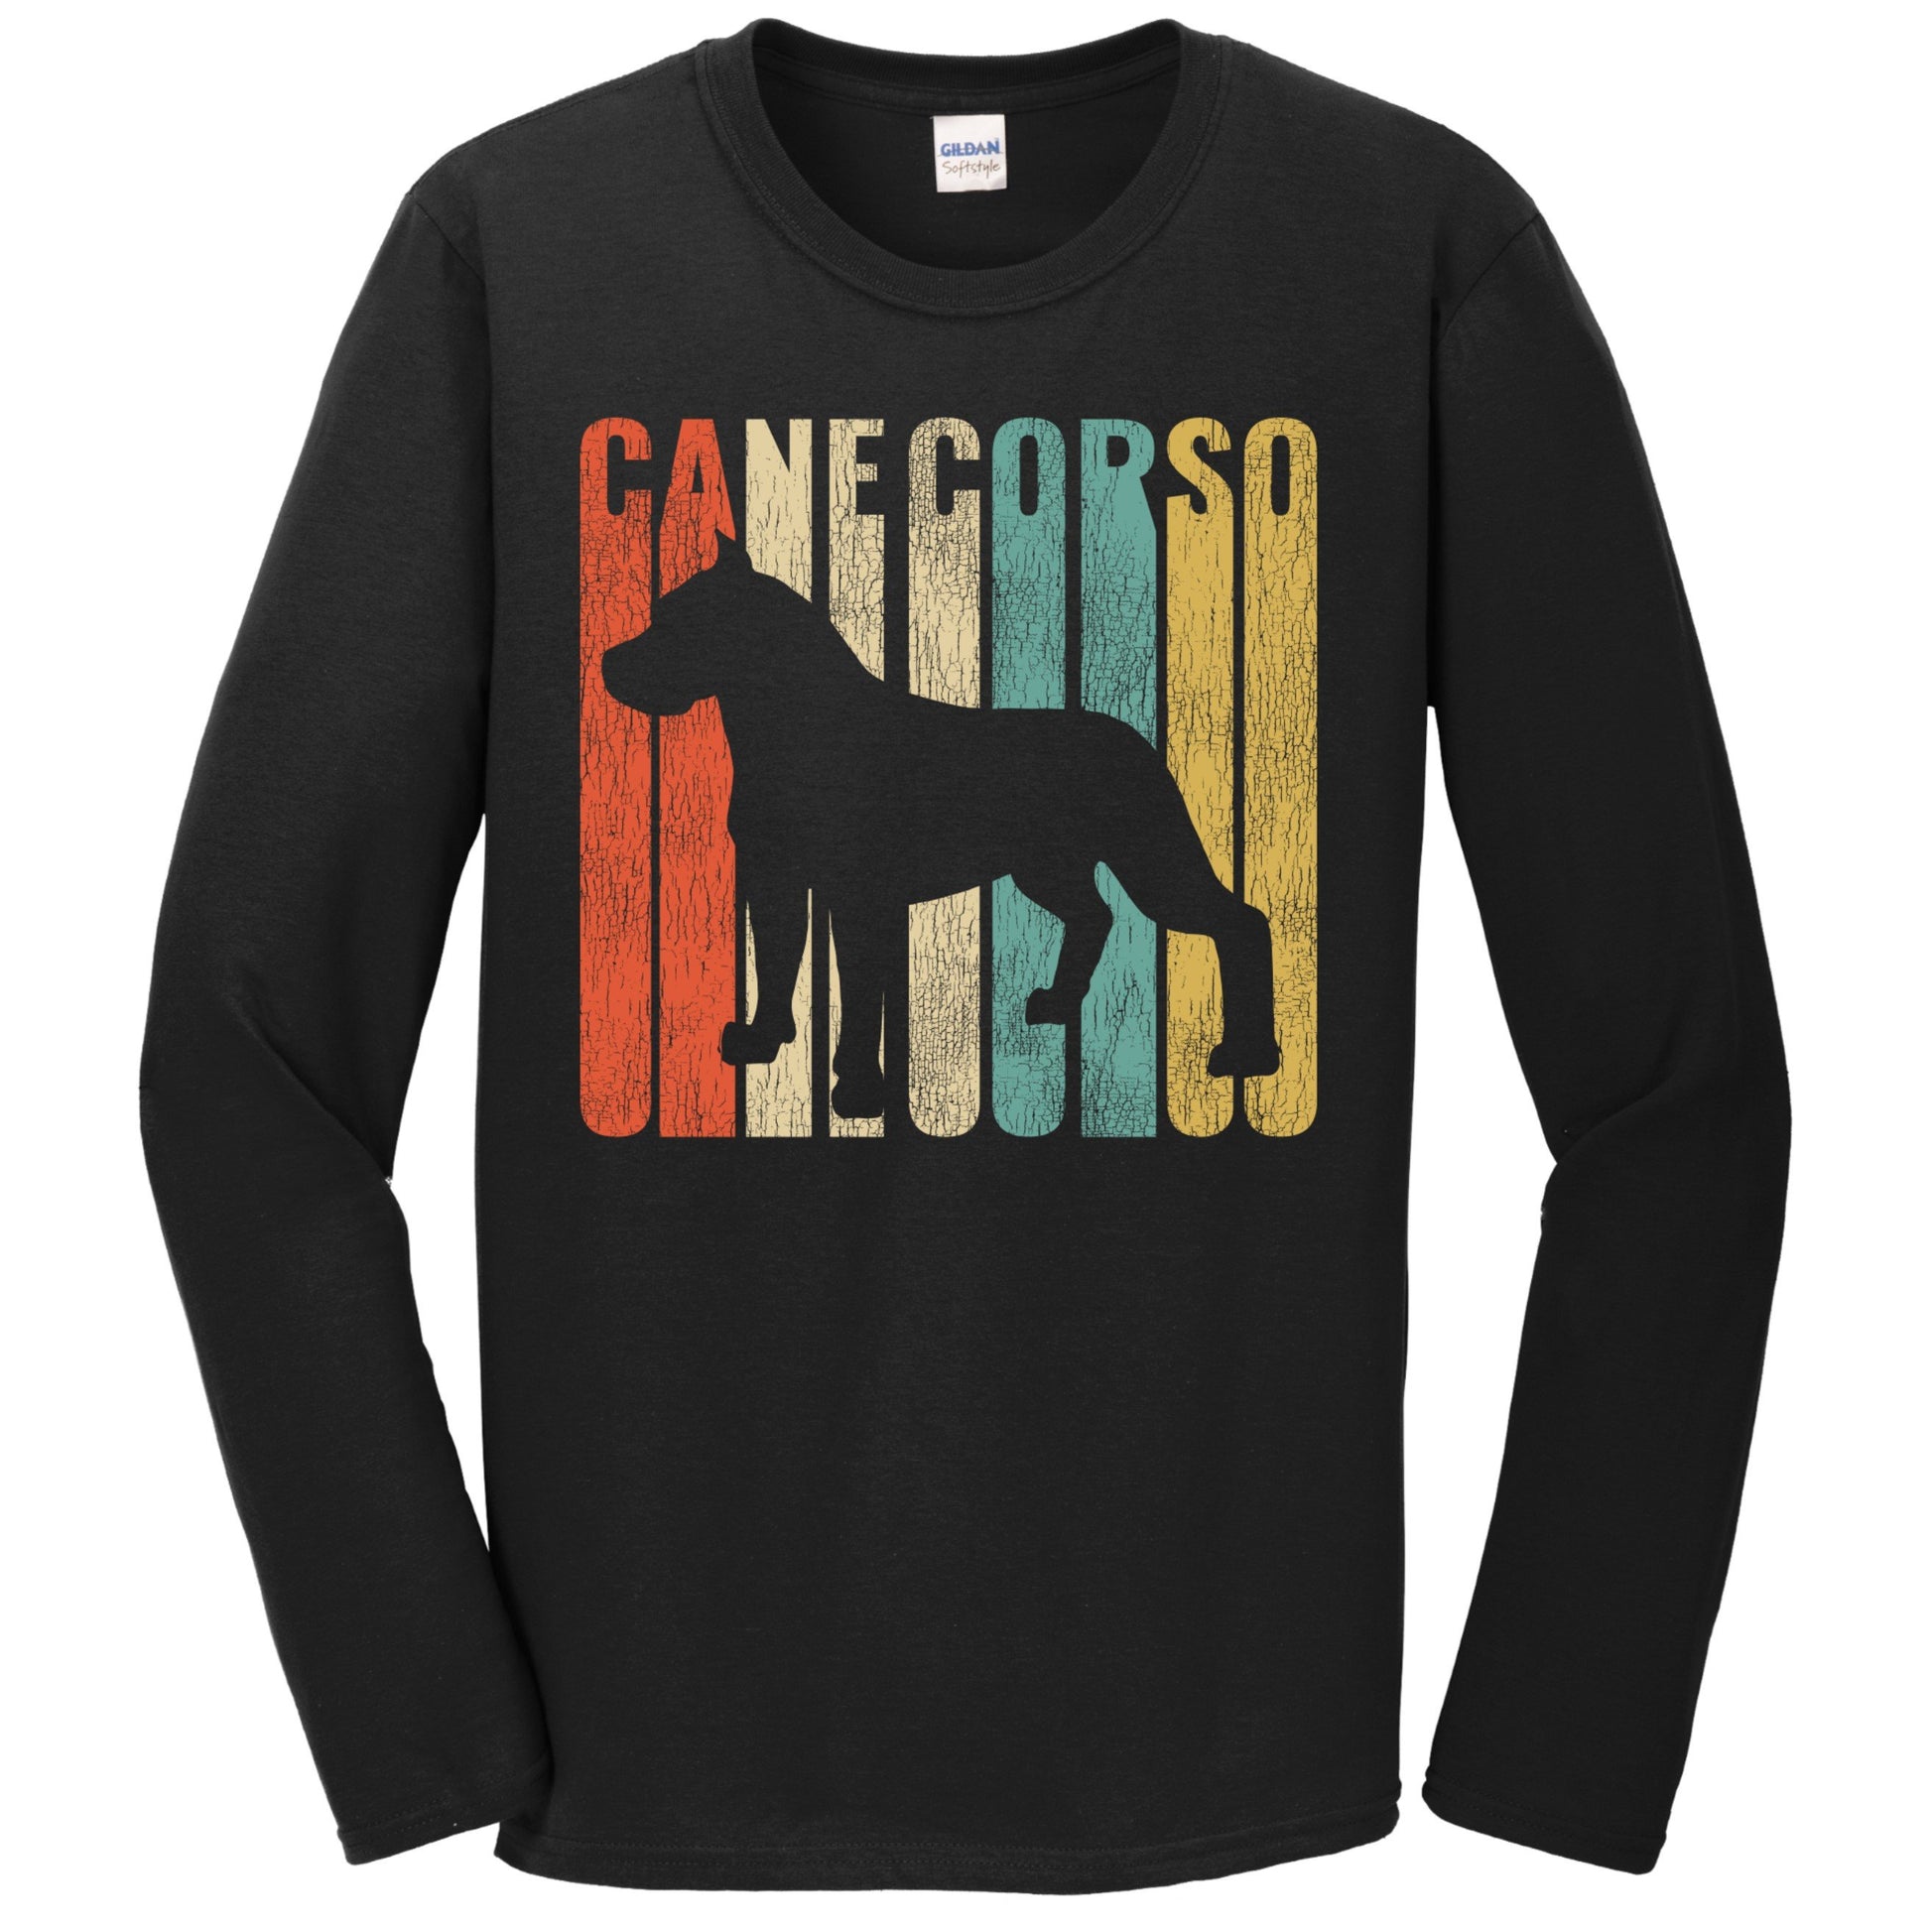 Retro 1970's Style Cane Corso Dog Silhouette Cracked Distressed Long Sleeve T-Shirt